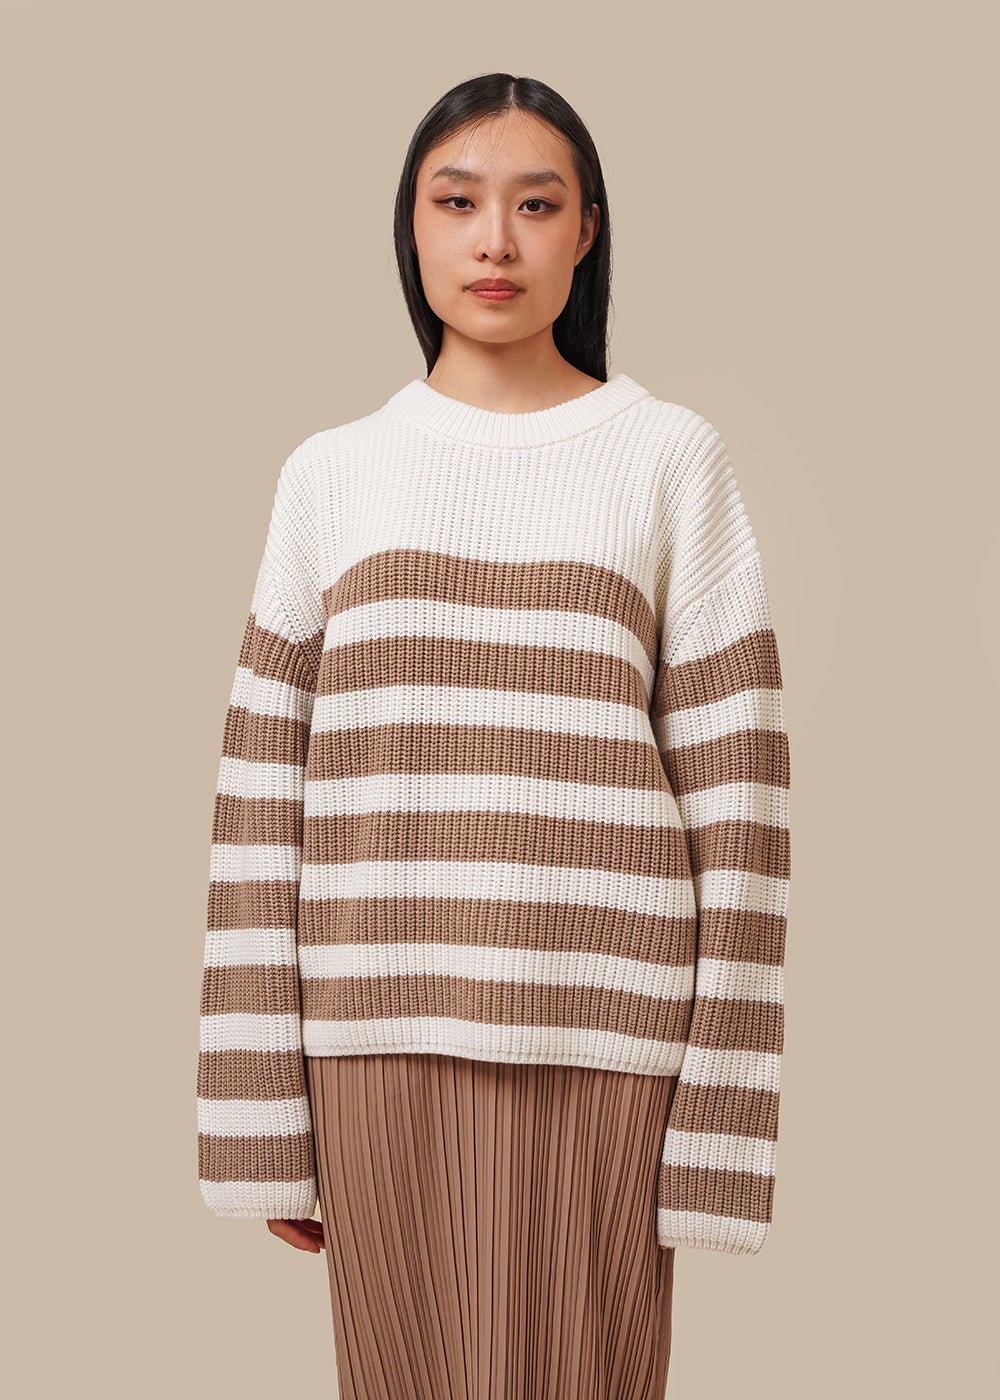 Stylein Aubry Sweater - New Classics Studios Sustainable Ethical Fashion Canada